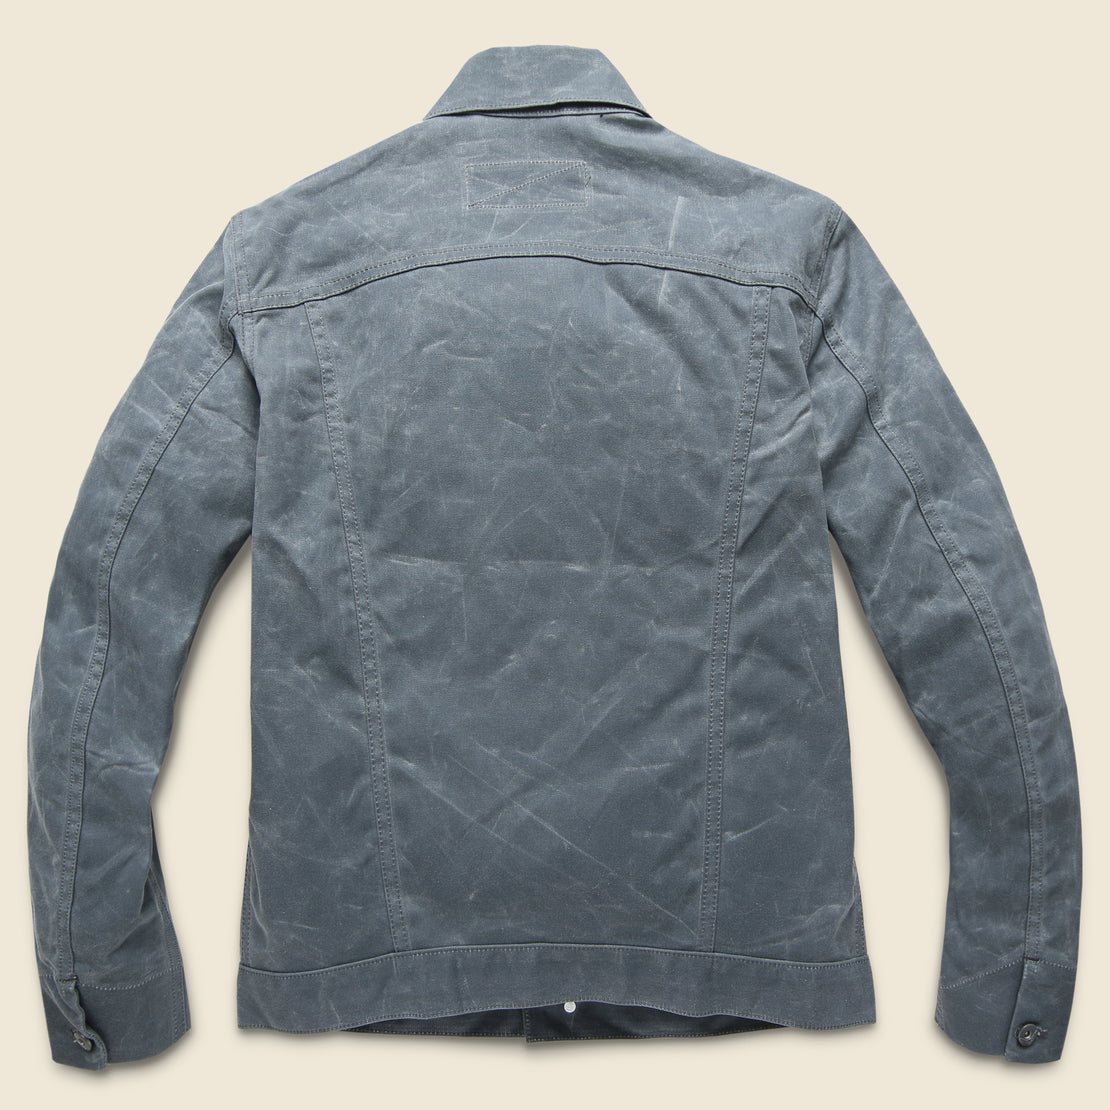 Supply Jacket - Waxed Grey Ridgeline - Rogue Territory - STAG Provisions - Outerwear - Coat / Jacket